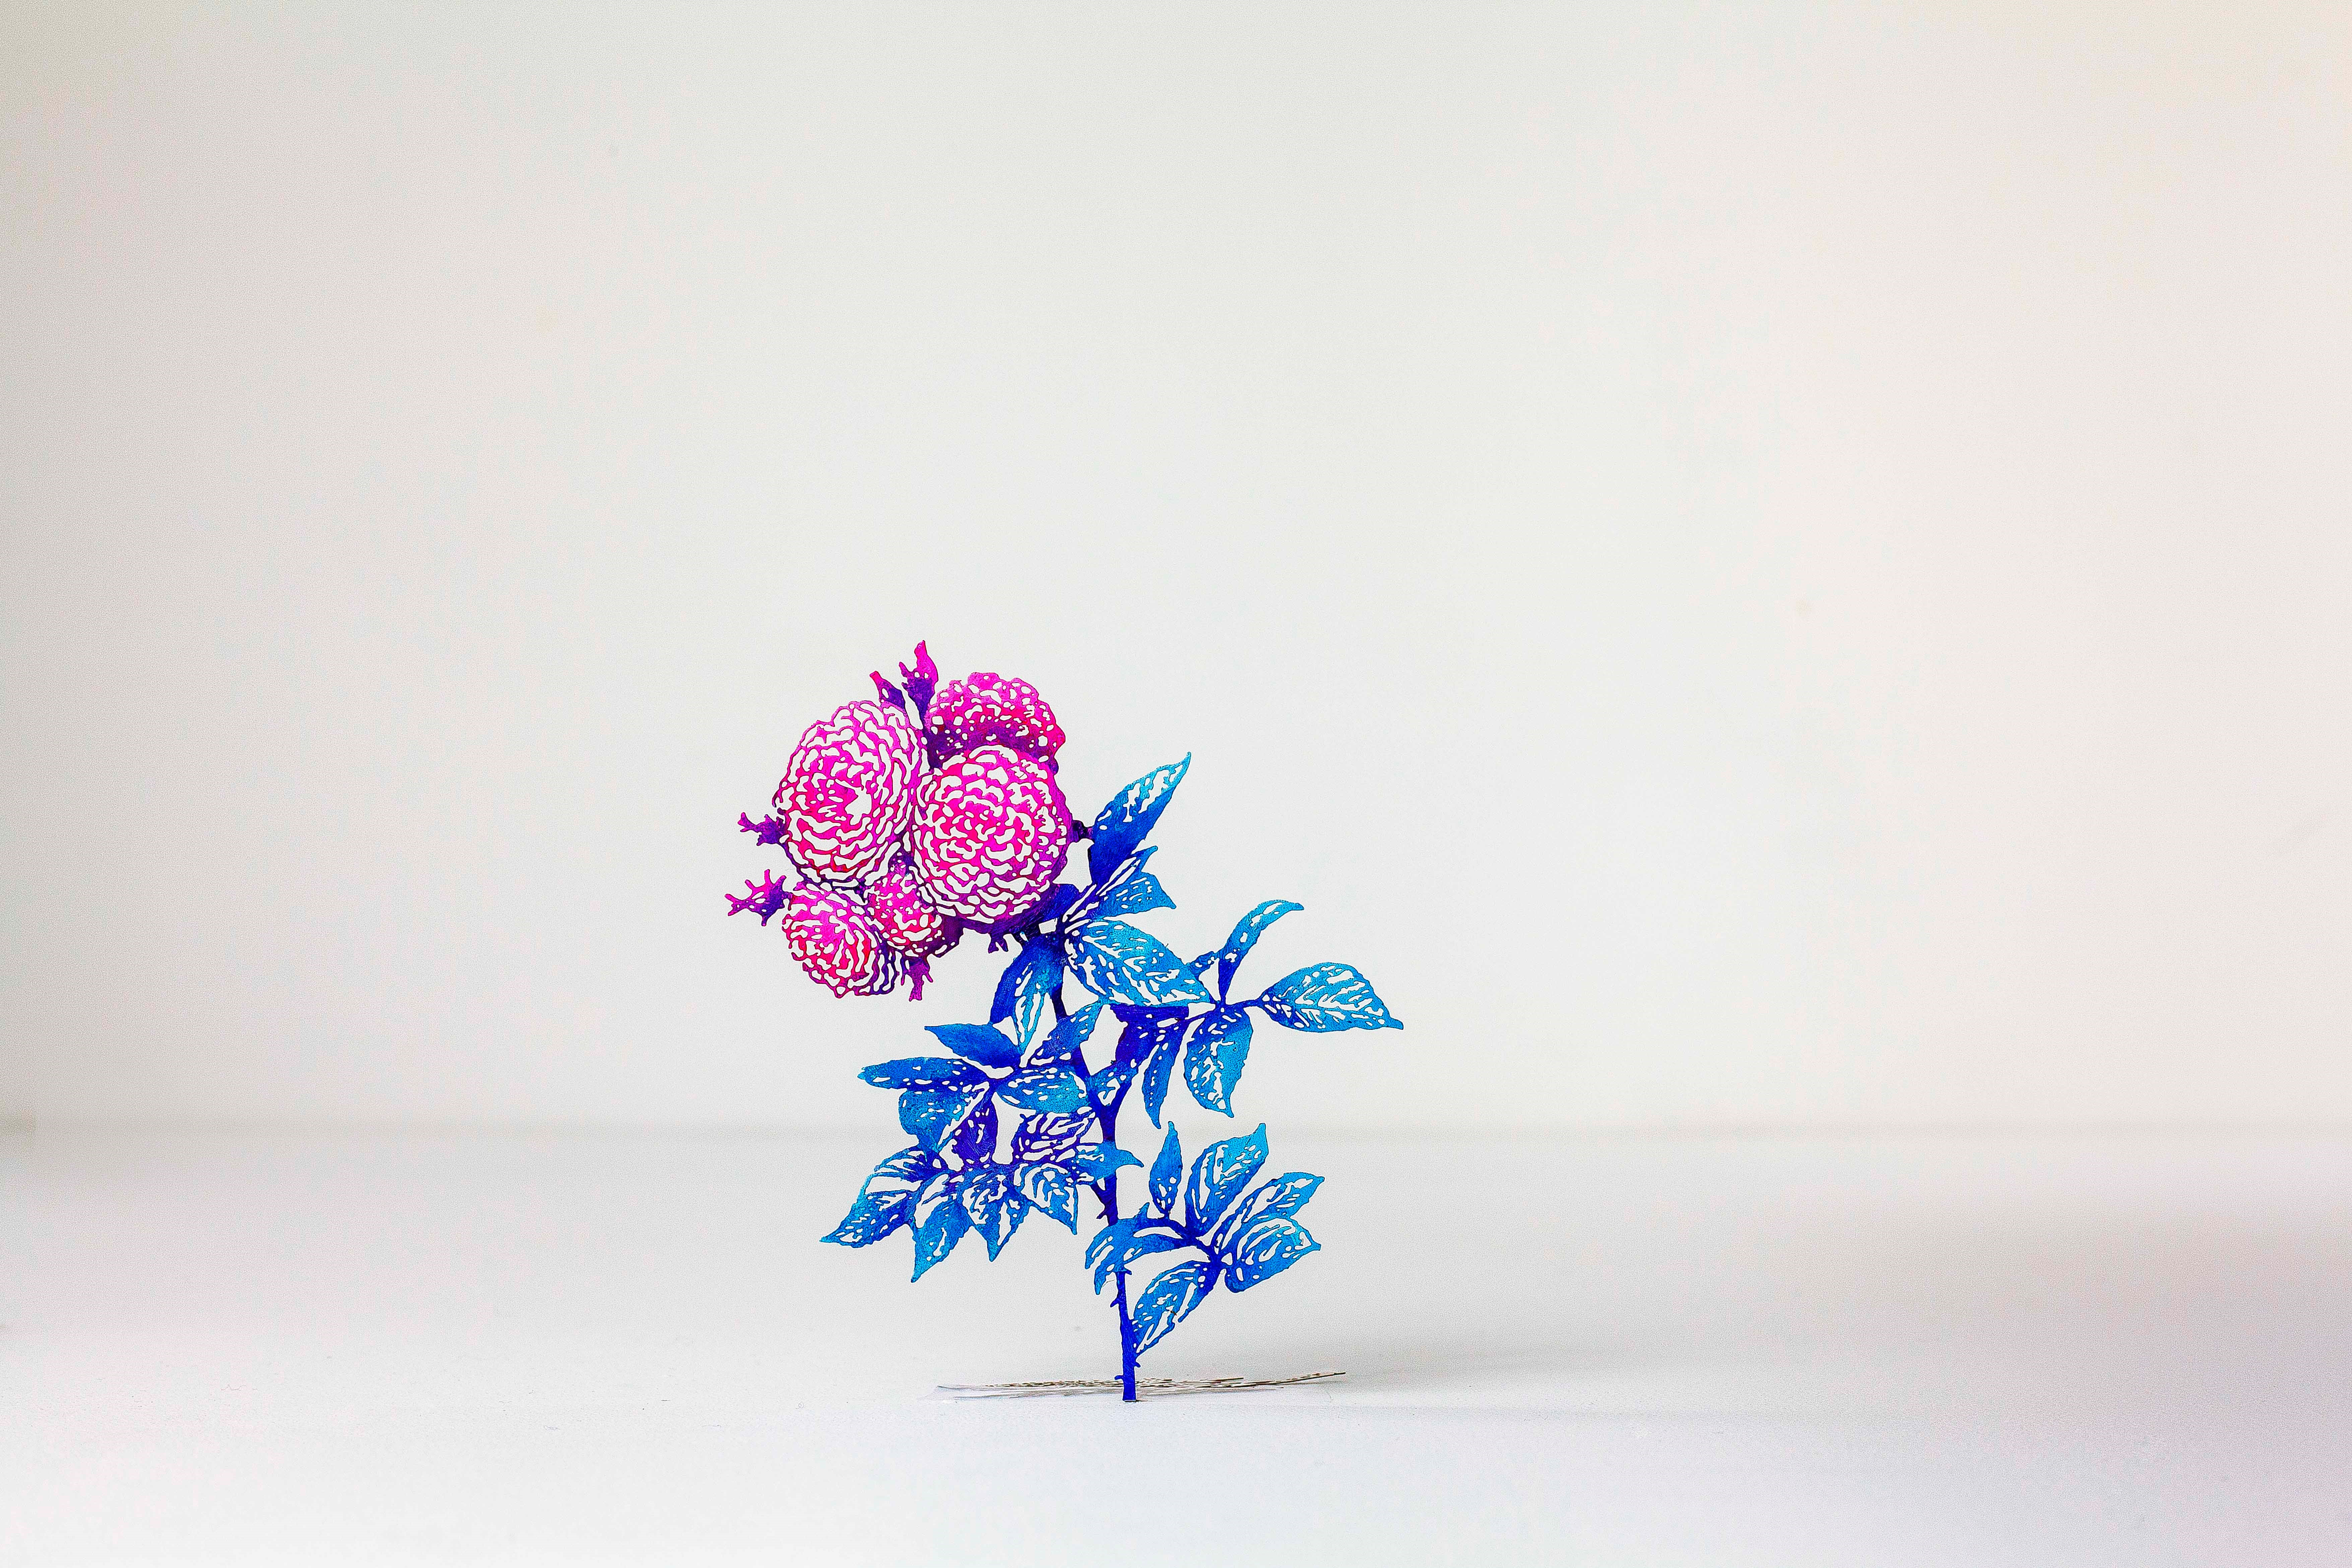 Etched, single flower, hand-painted fluorescent pink and blue